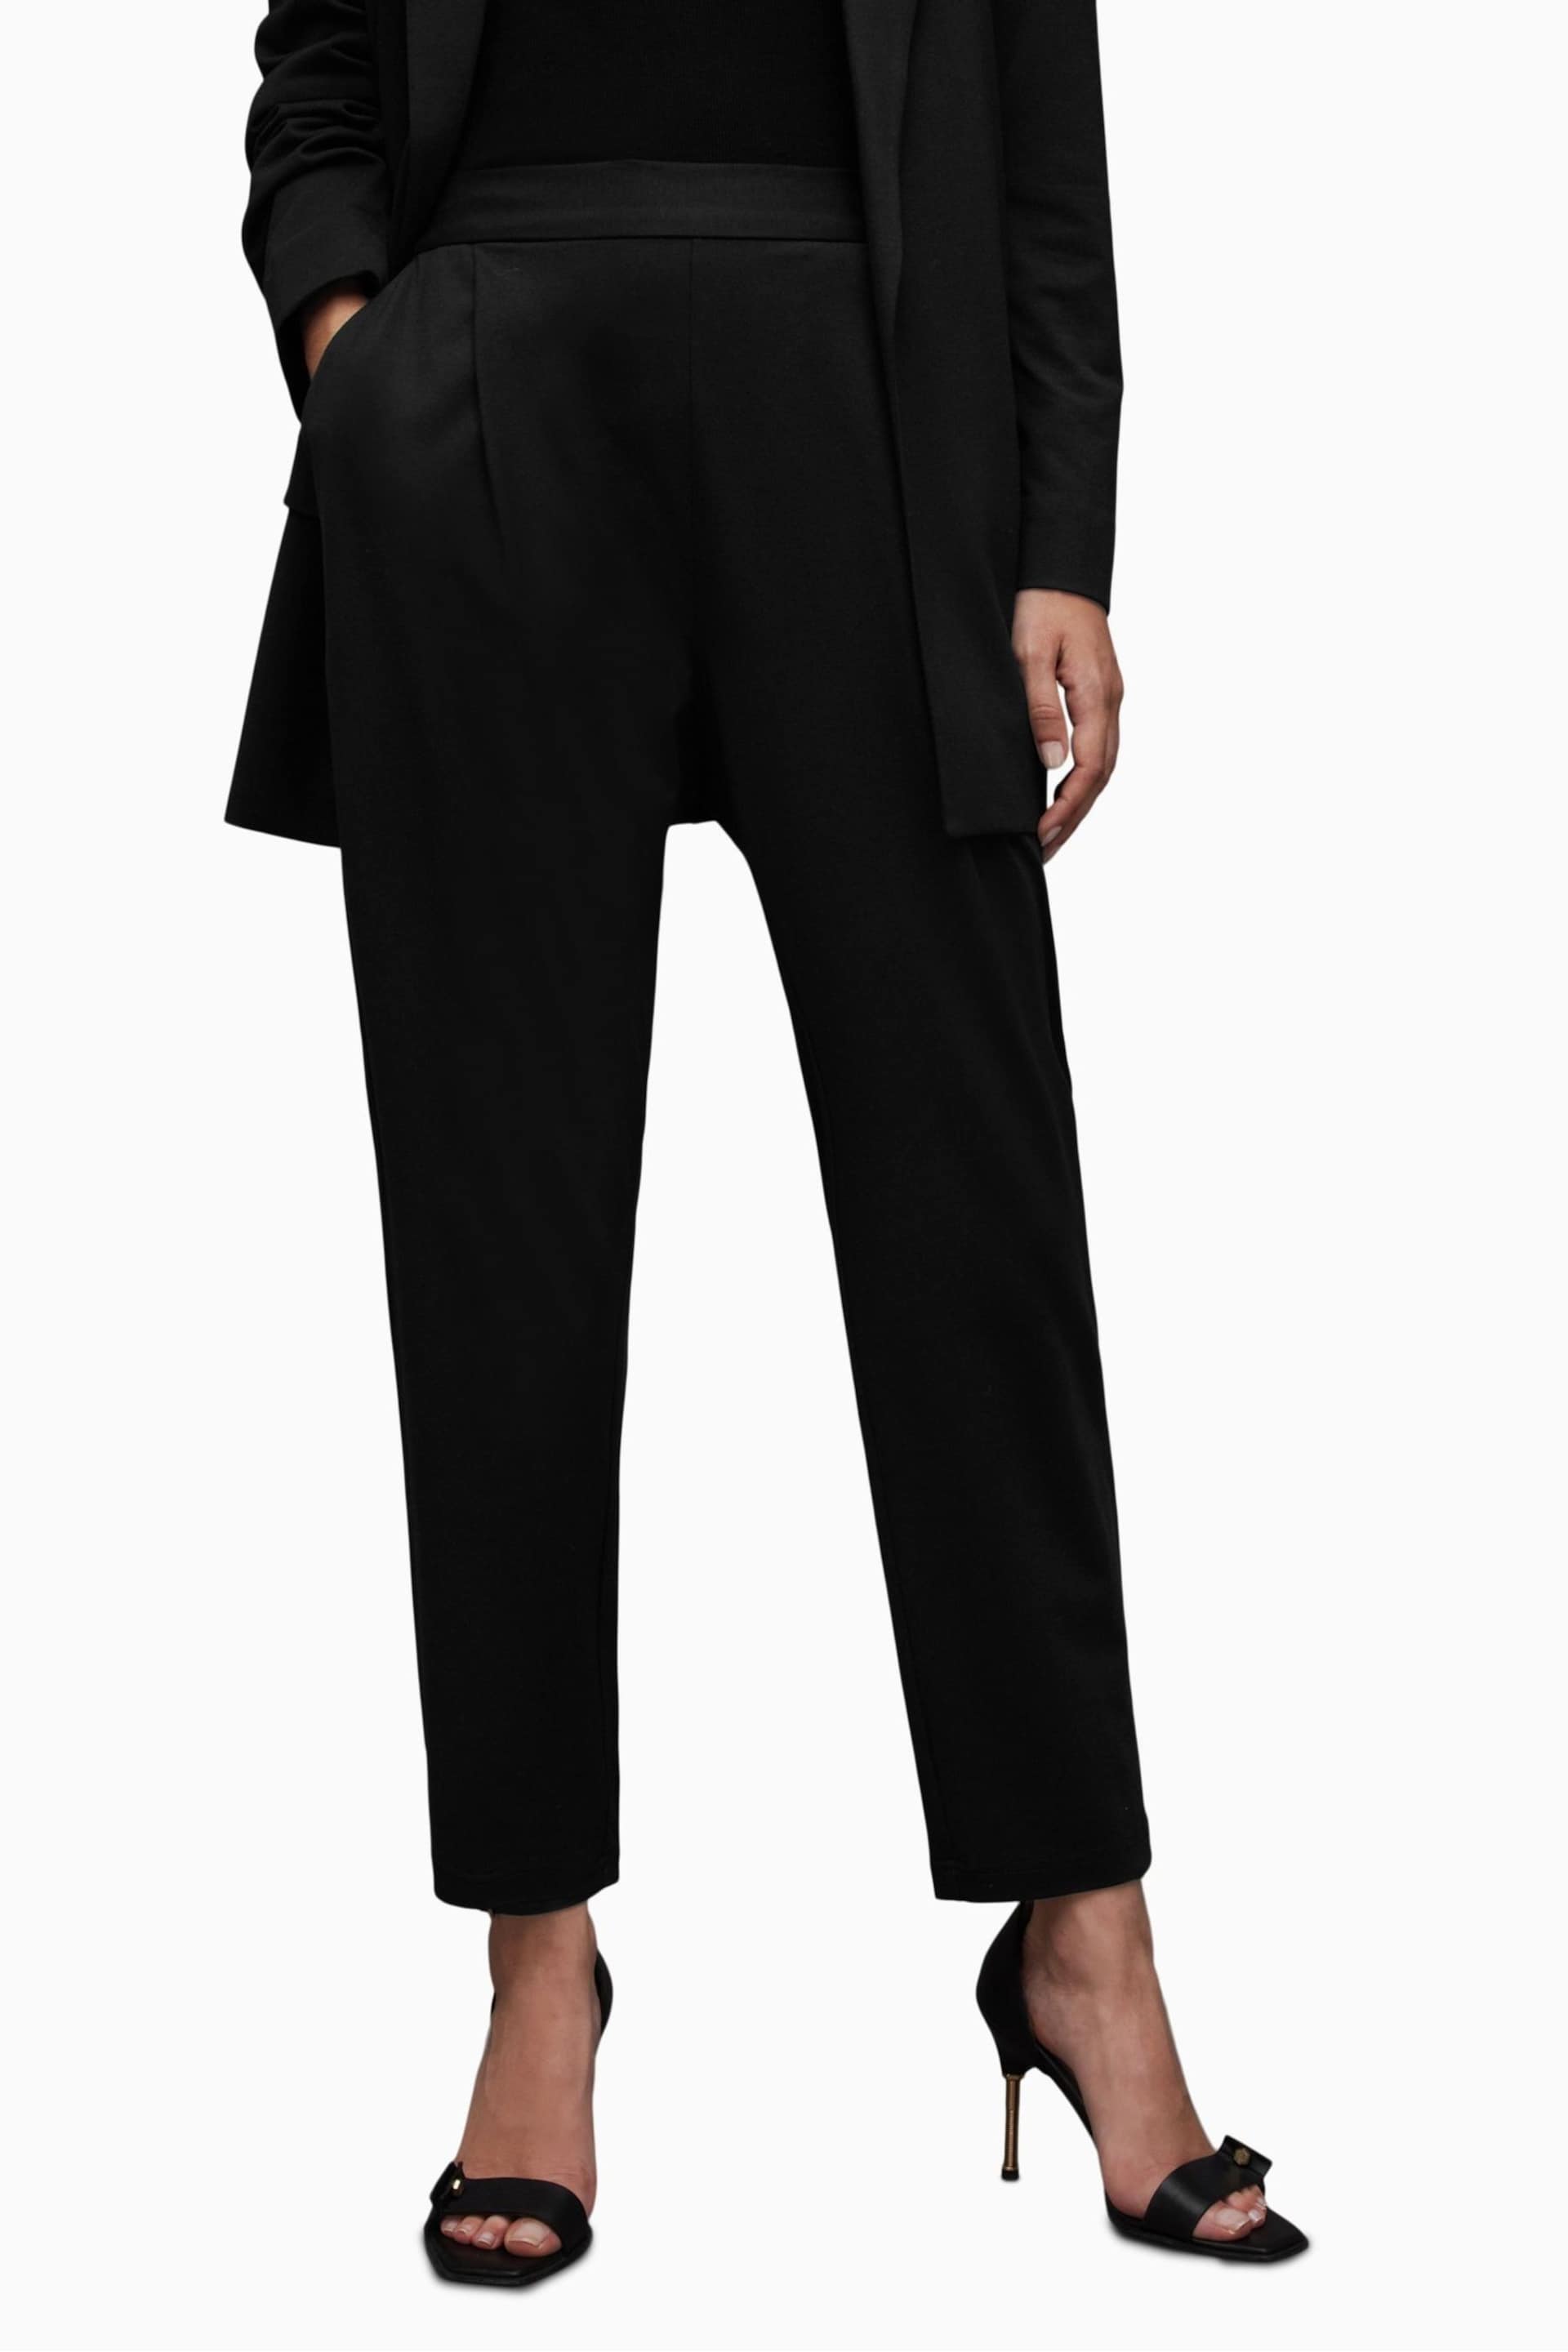 AllSaints Black Aleida Jersey Trousers - Image 1 of 6